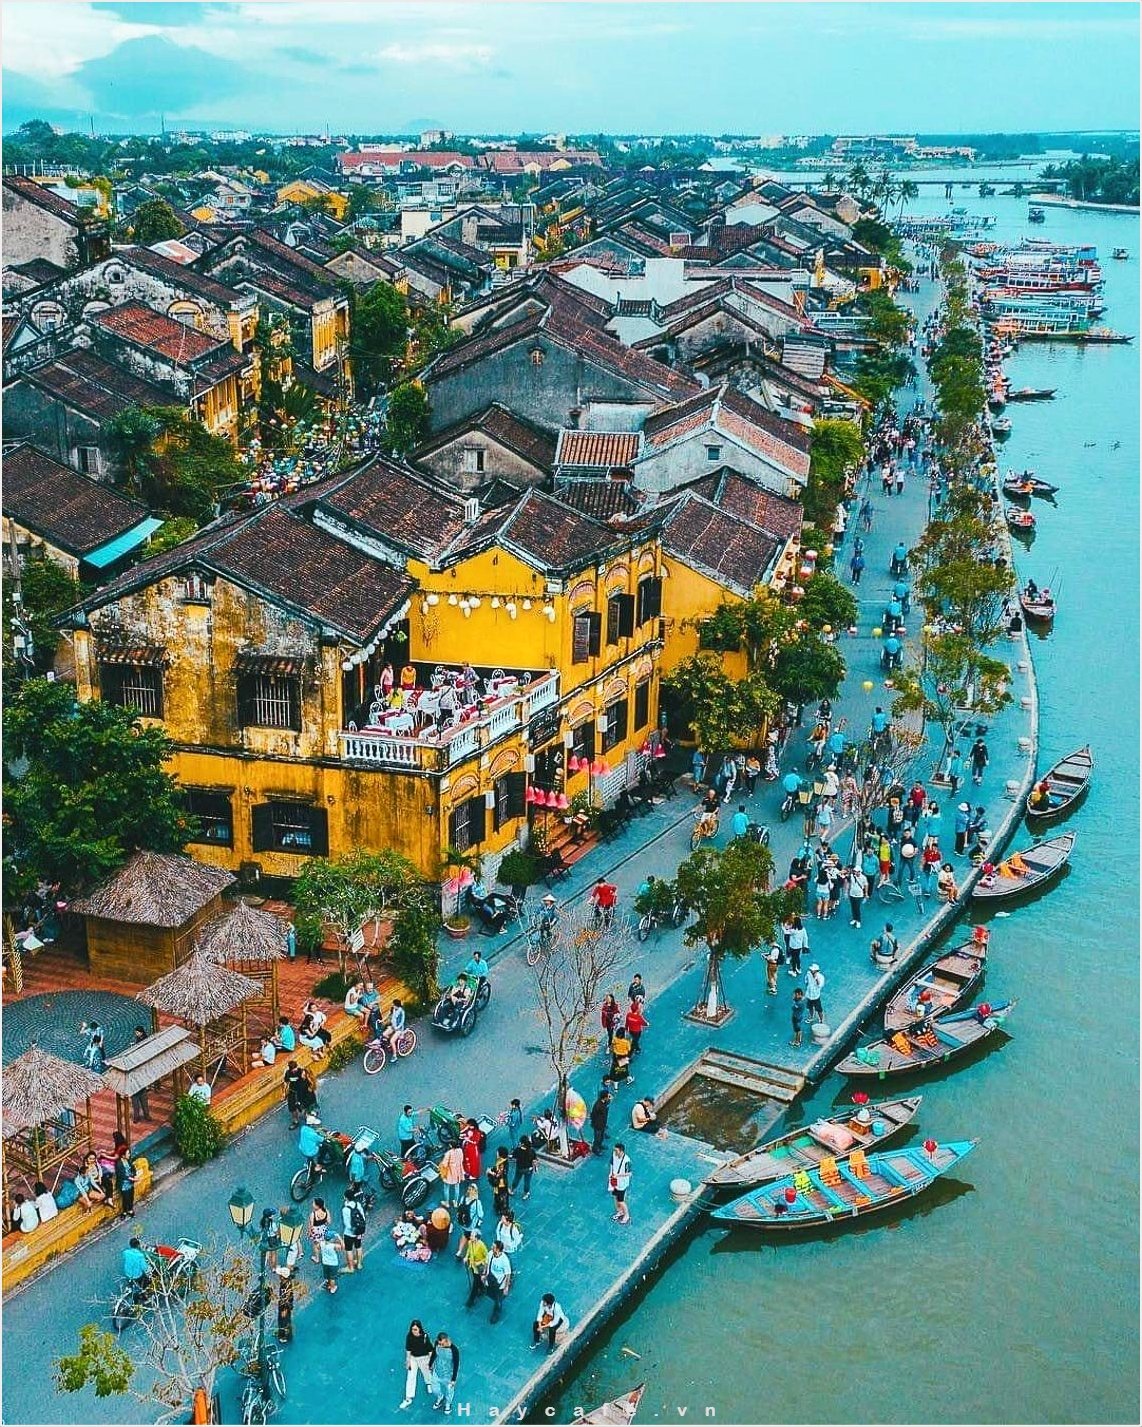 Ancient beauty of Hoi An